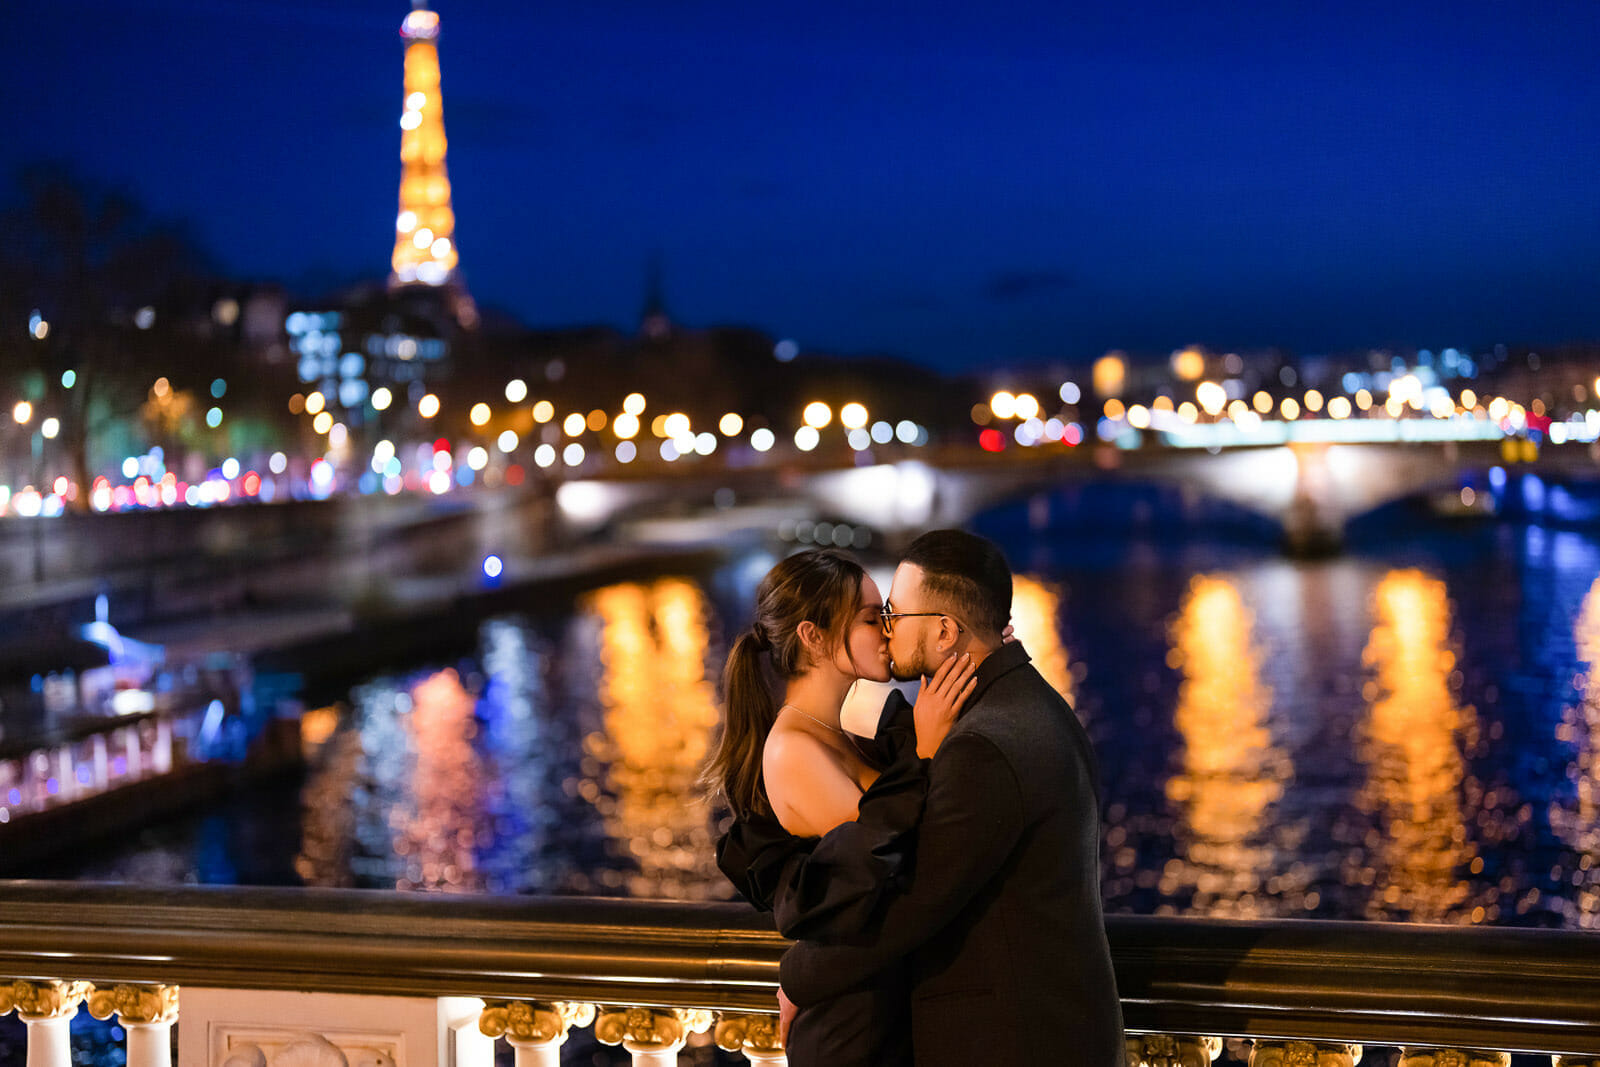 Romantic Paris couple photoshoot at Alexander III Bridge during the Blue Hour with Eiffel Tower sparkling